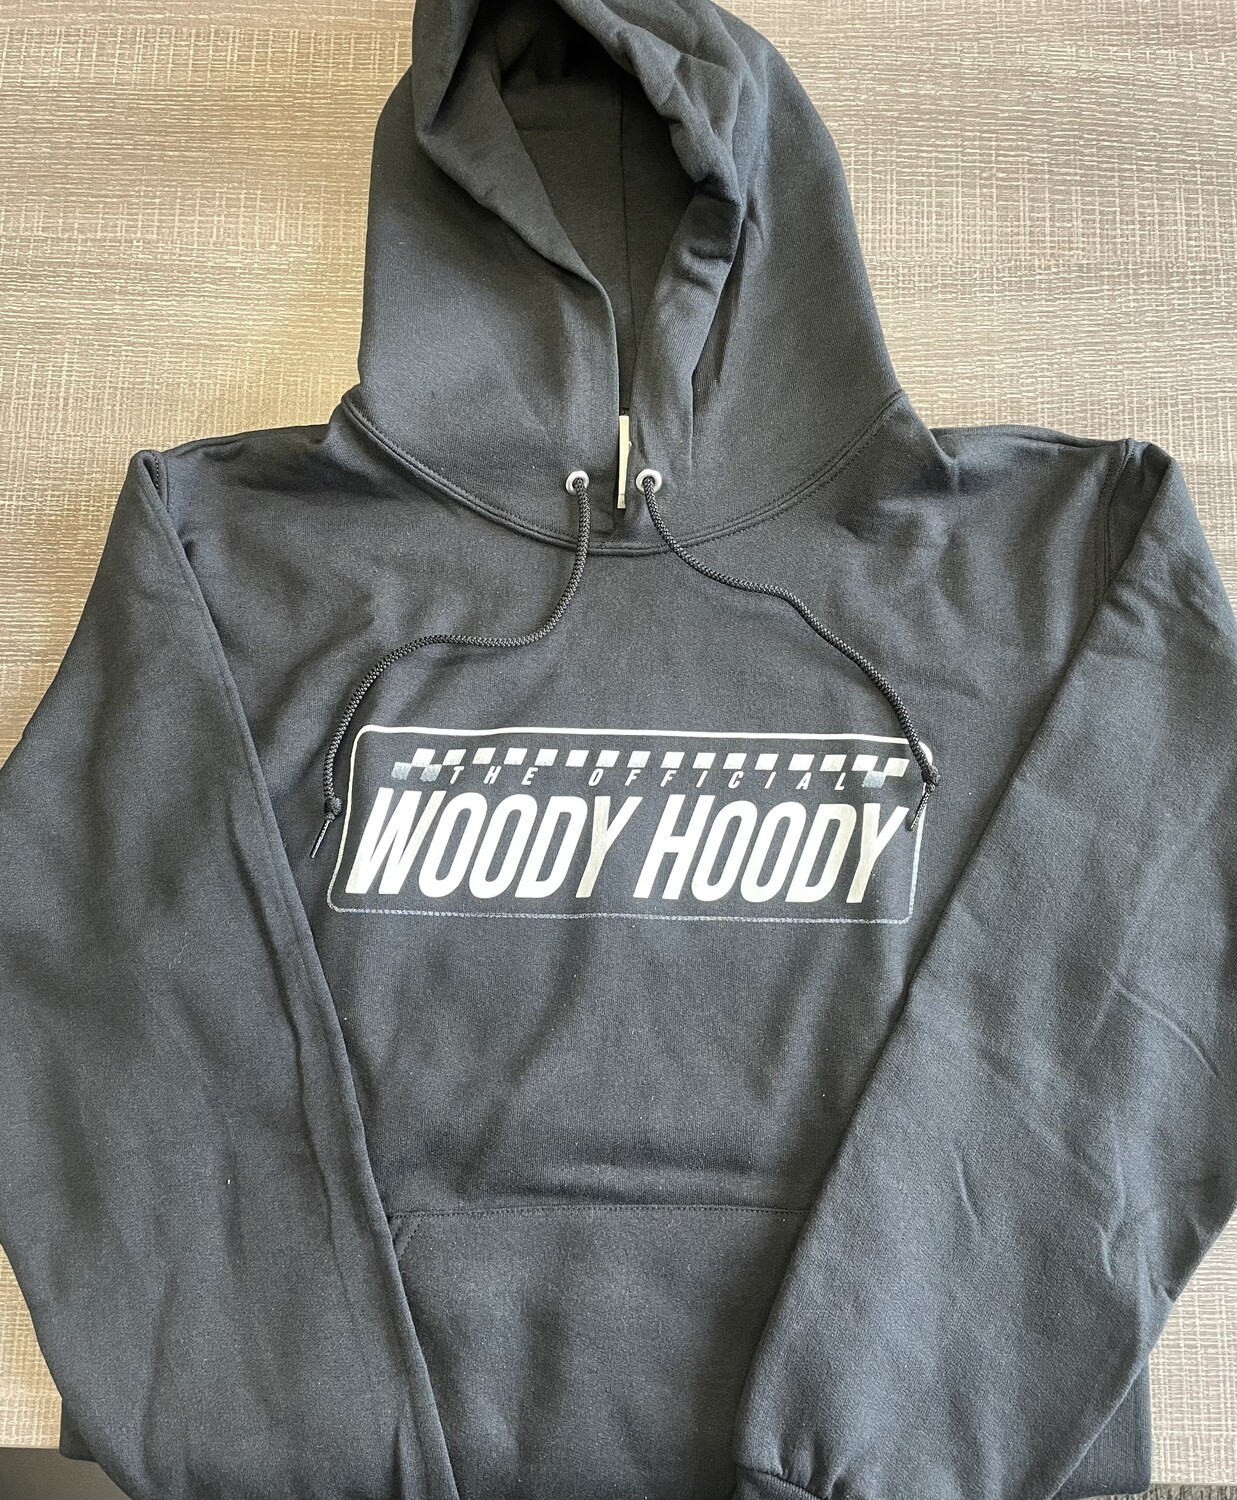 The "Official" Woody Hoody - Tickets - staffordspeedway